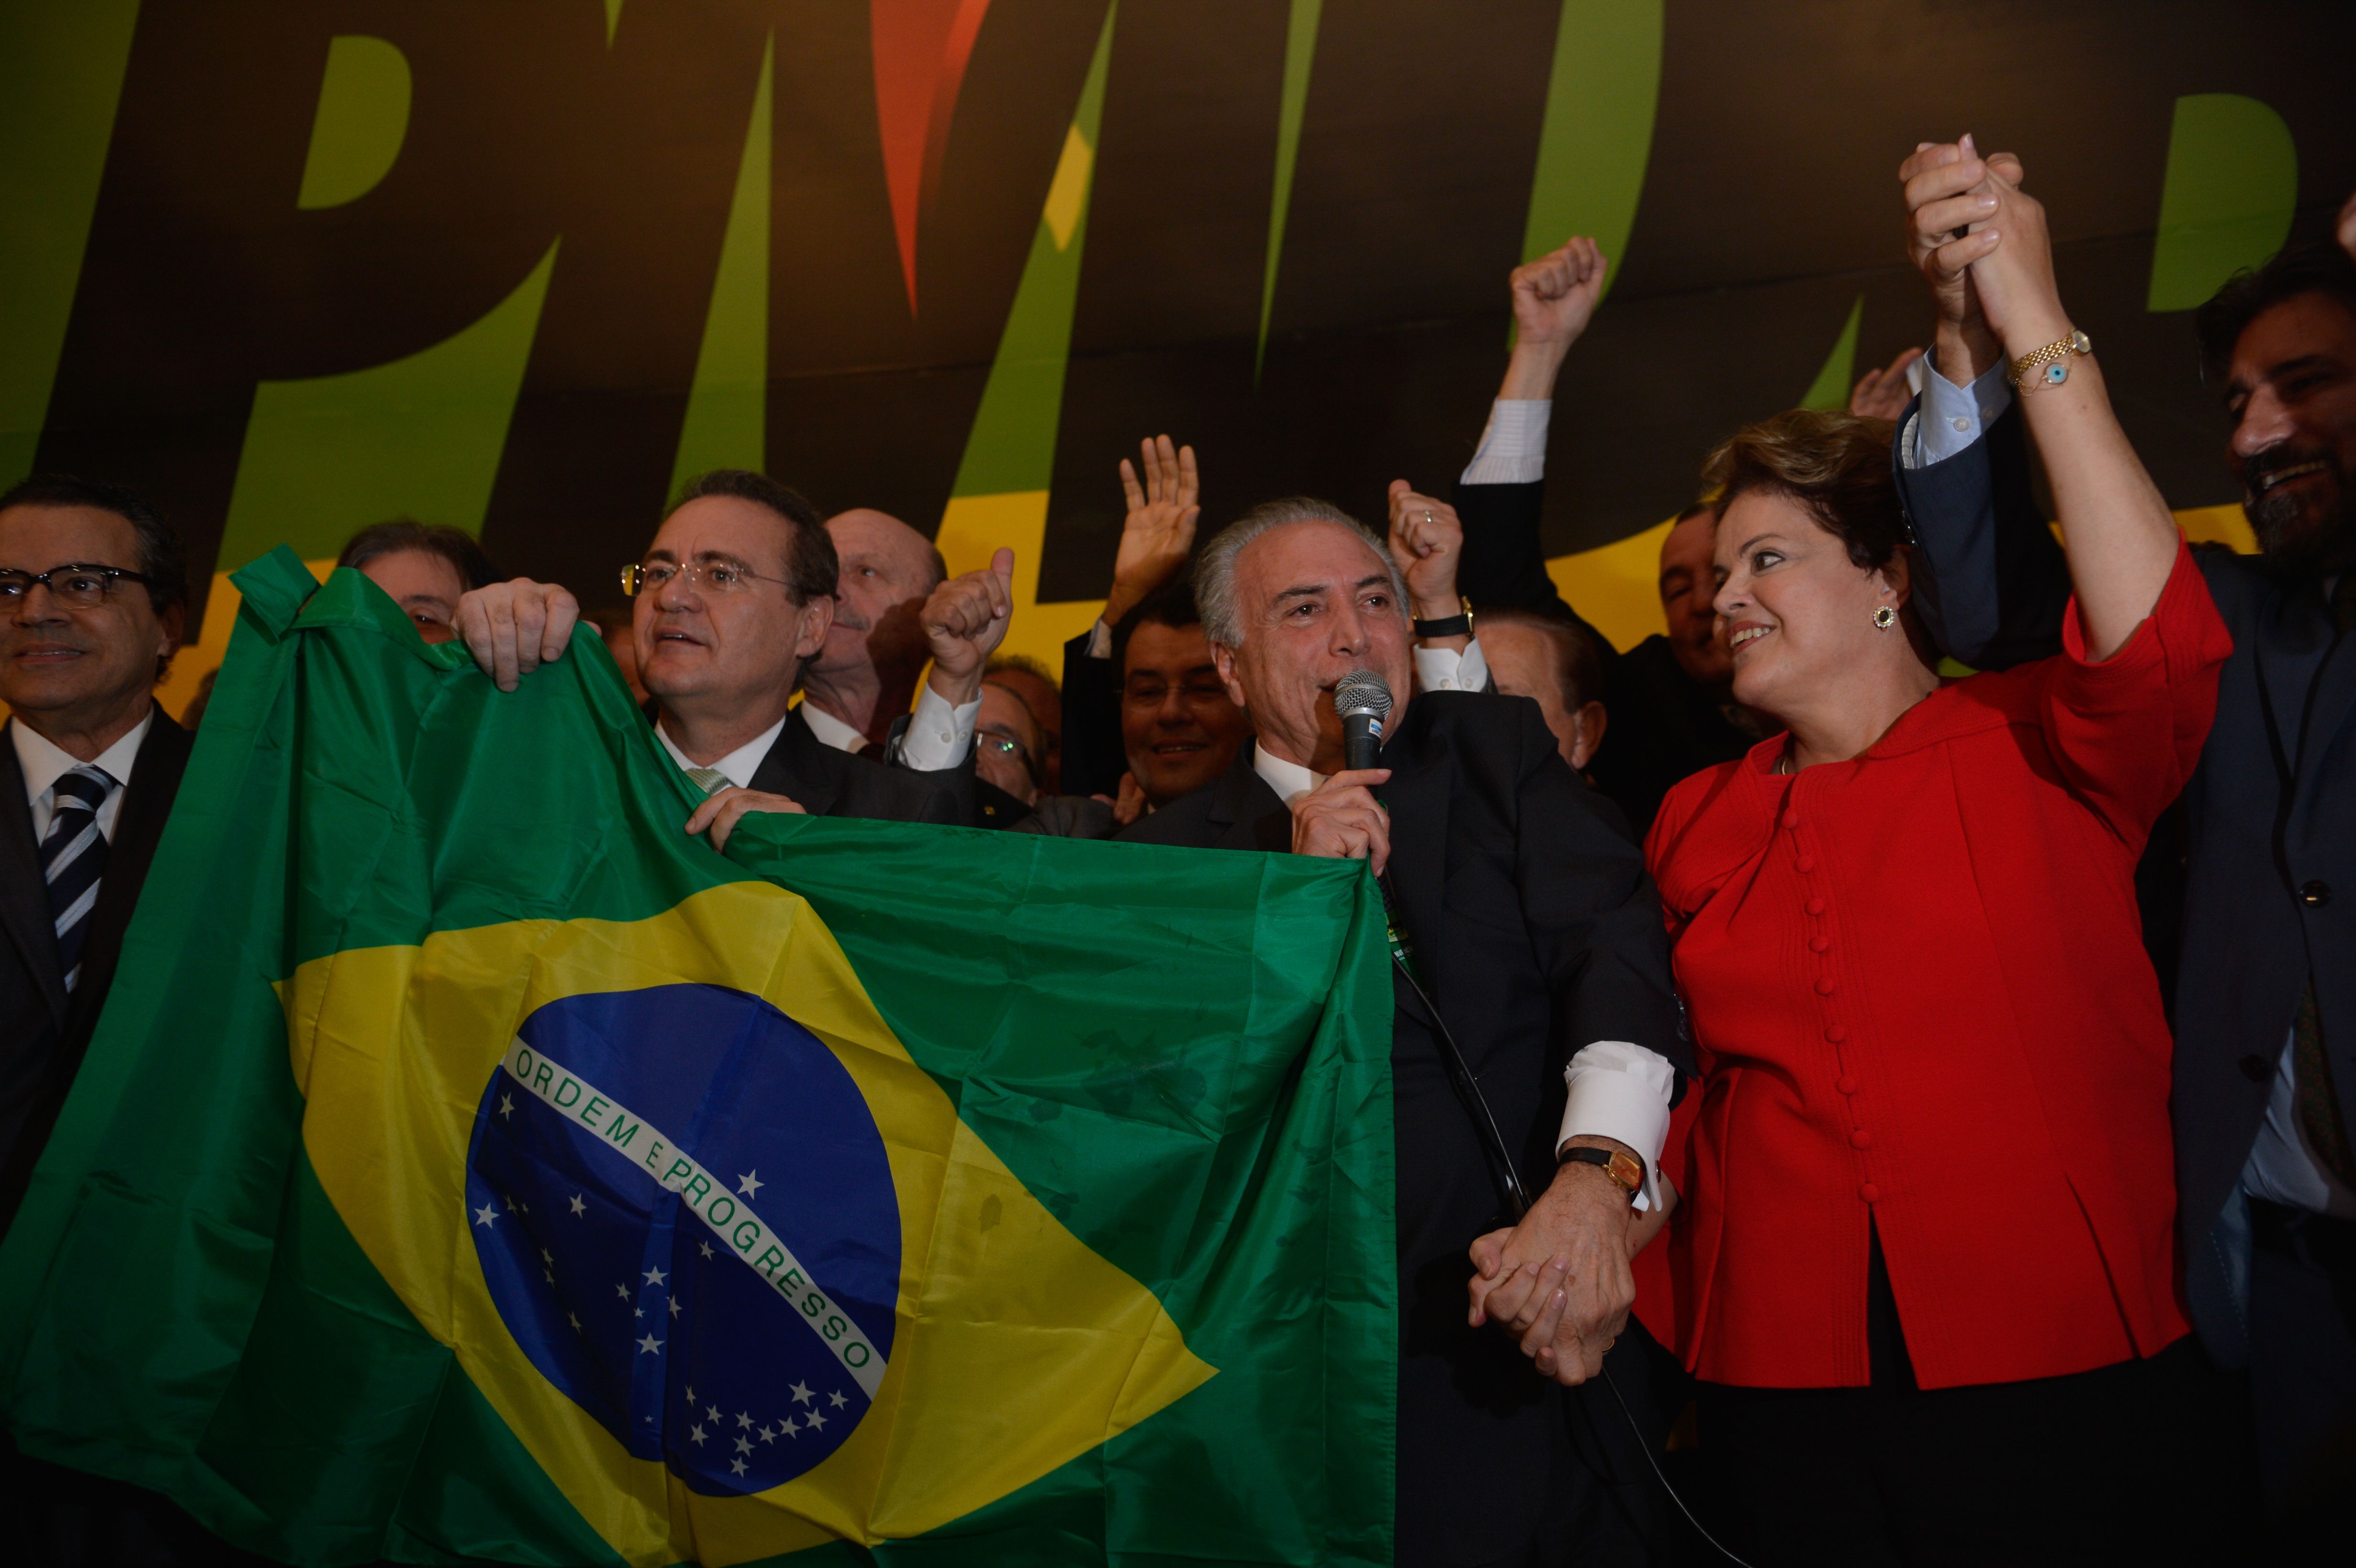 Dilma Rousseff receives support from the PMDB Party for her reelection campaign